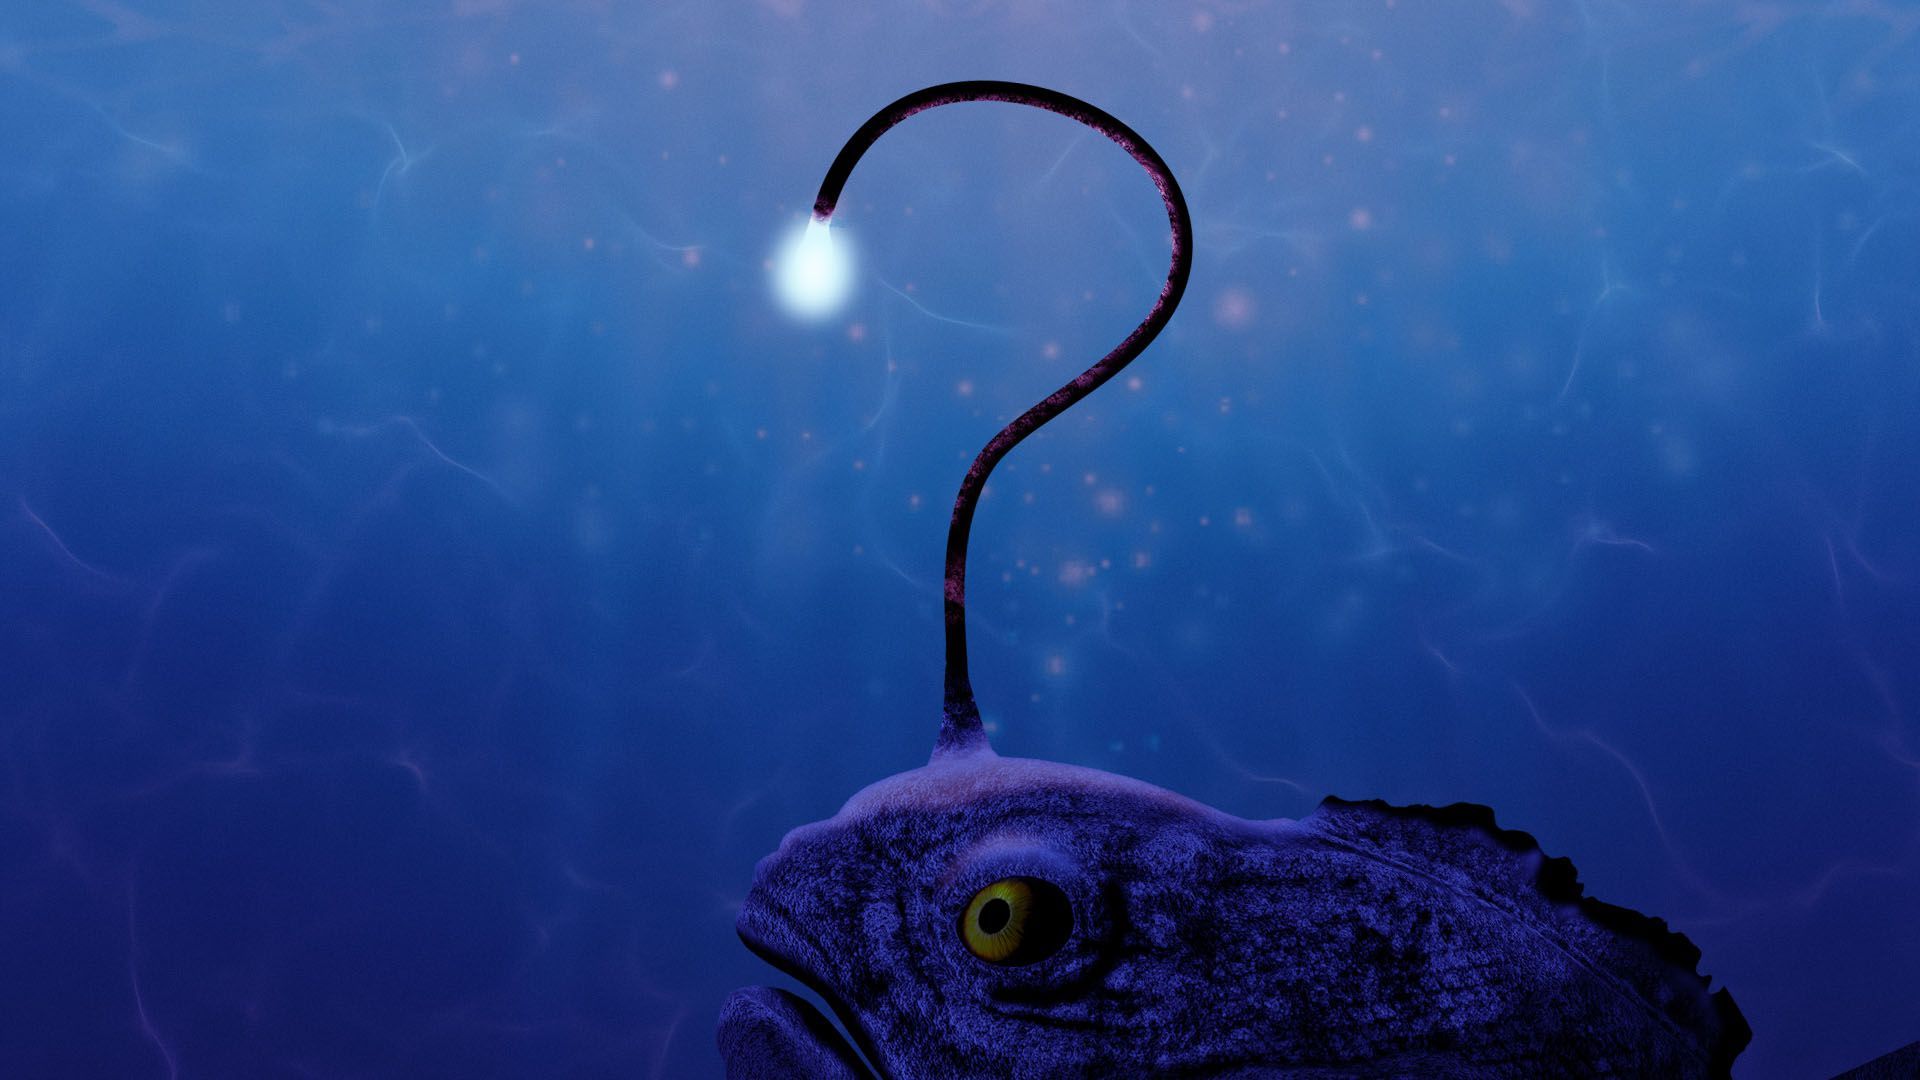 Illustration of a deep-sea fish with a photo-luminescent antenna in the shape of a question mark